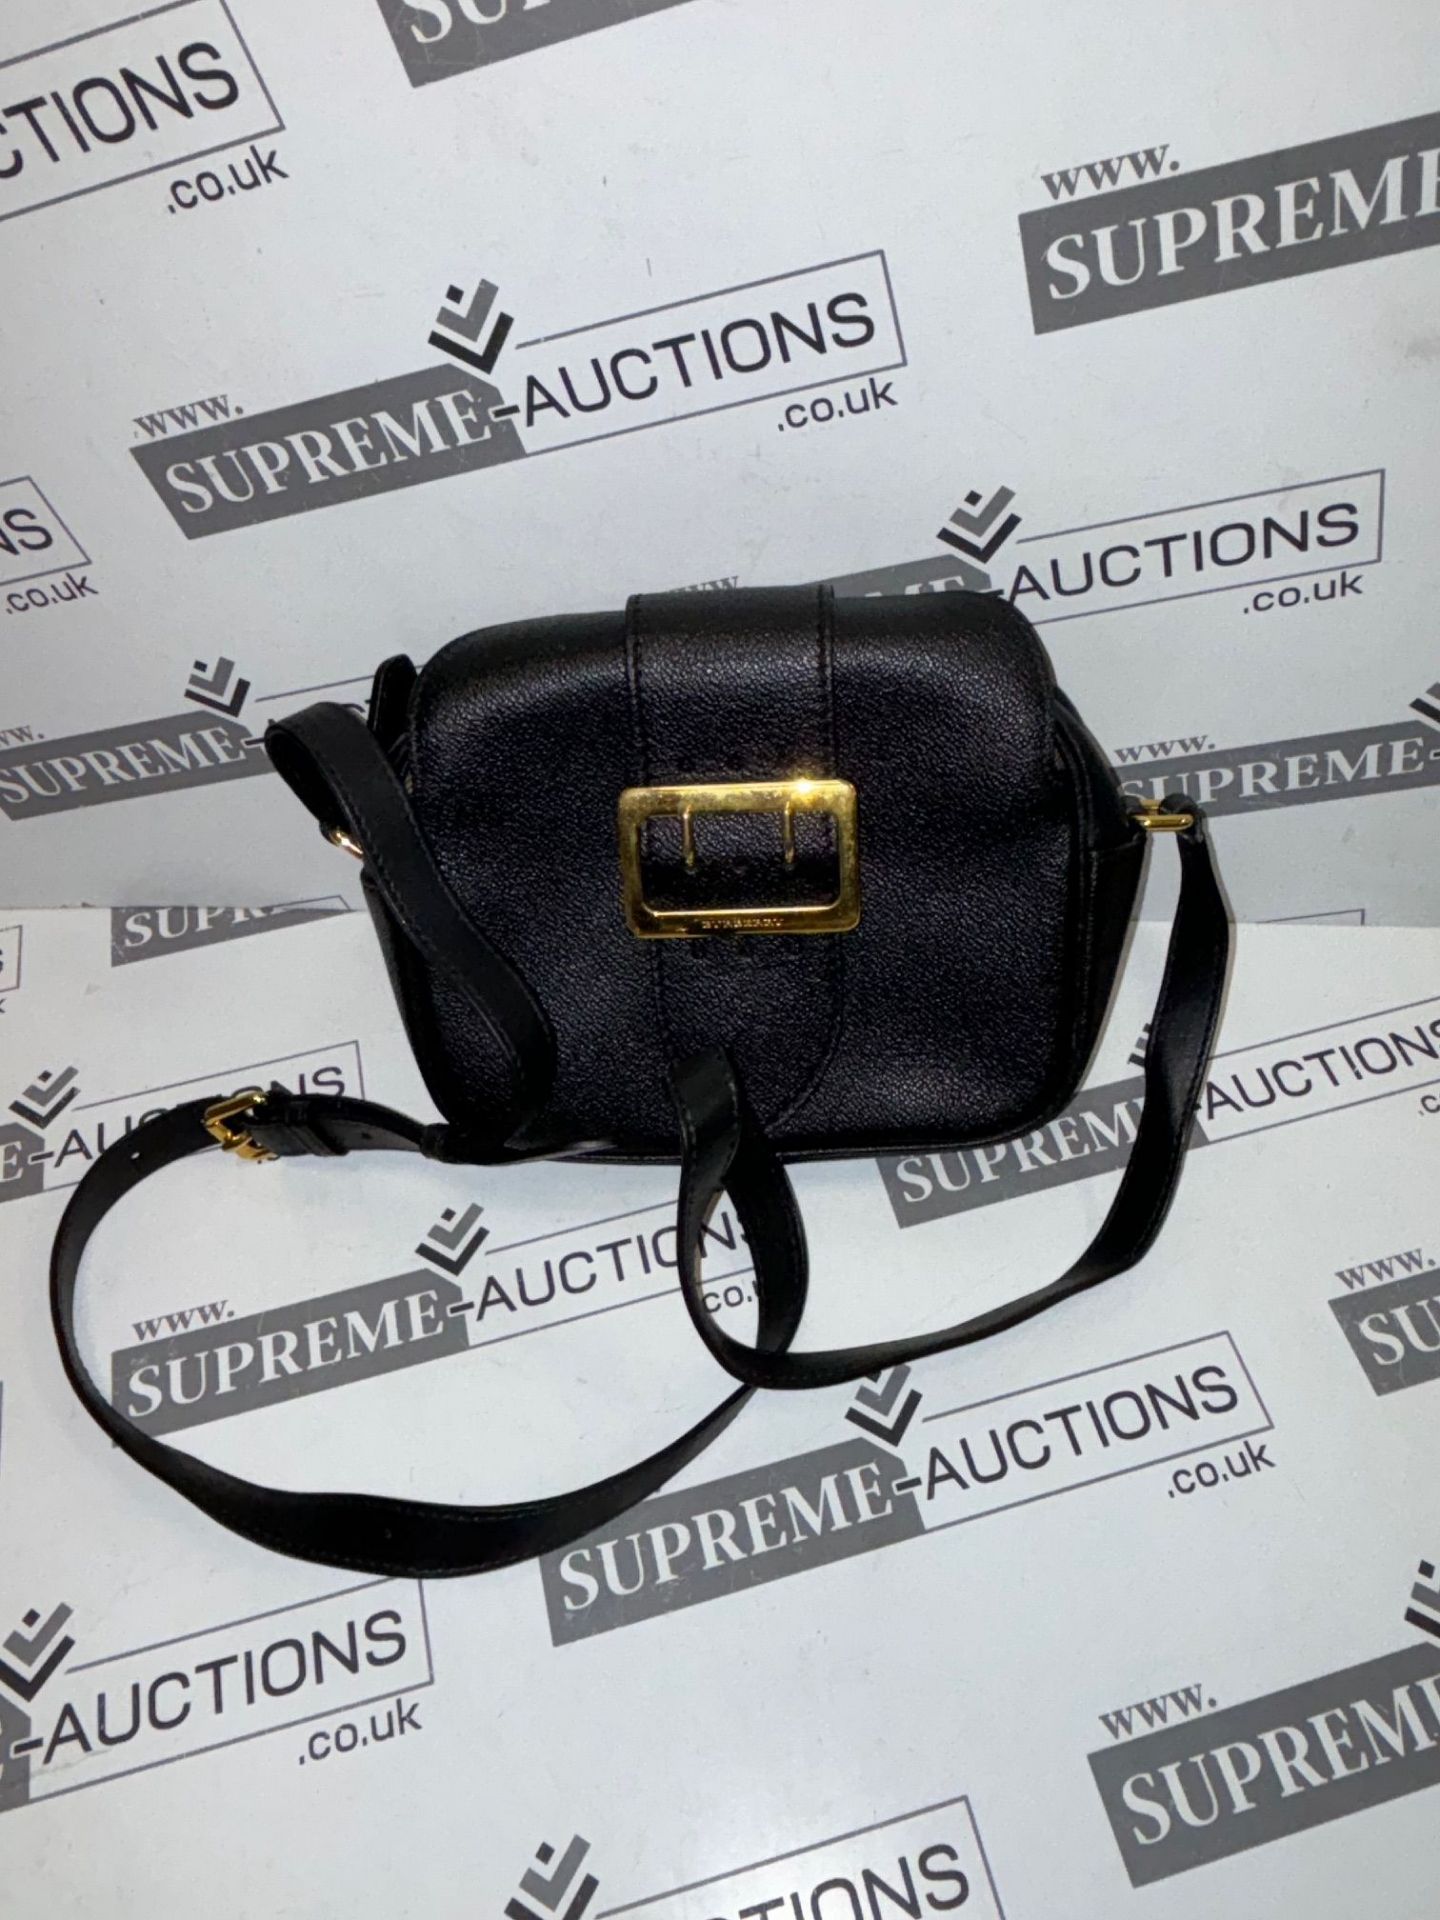 Burberry The Small Leather Buckle Bag in Black 20x18cm. - Image 4 of 11